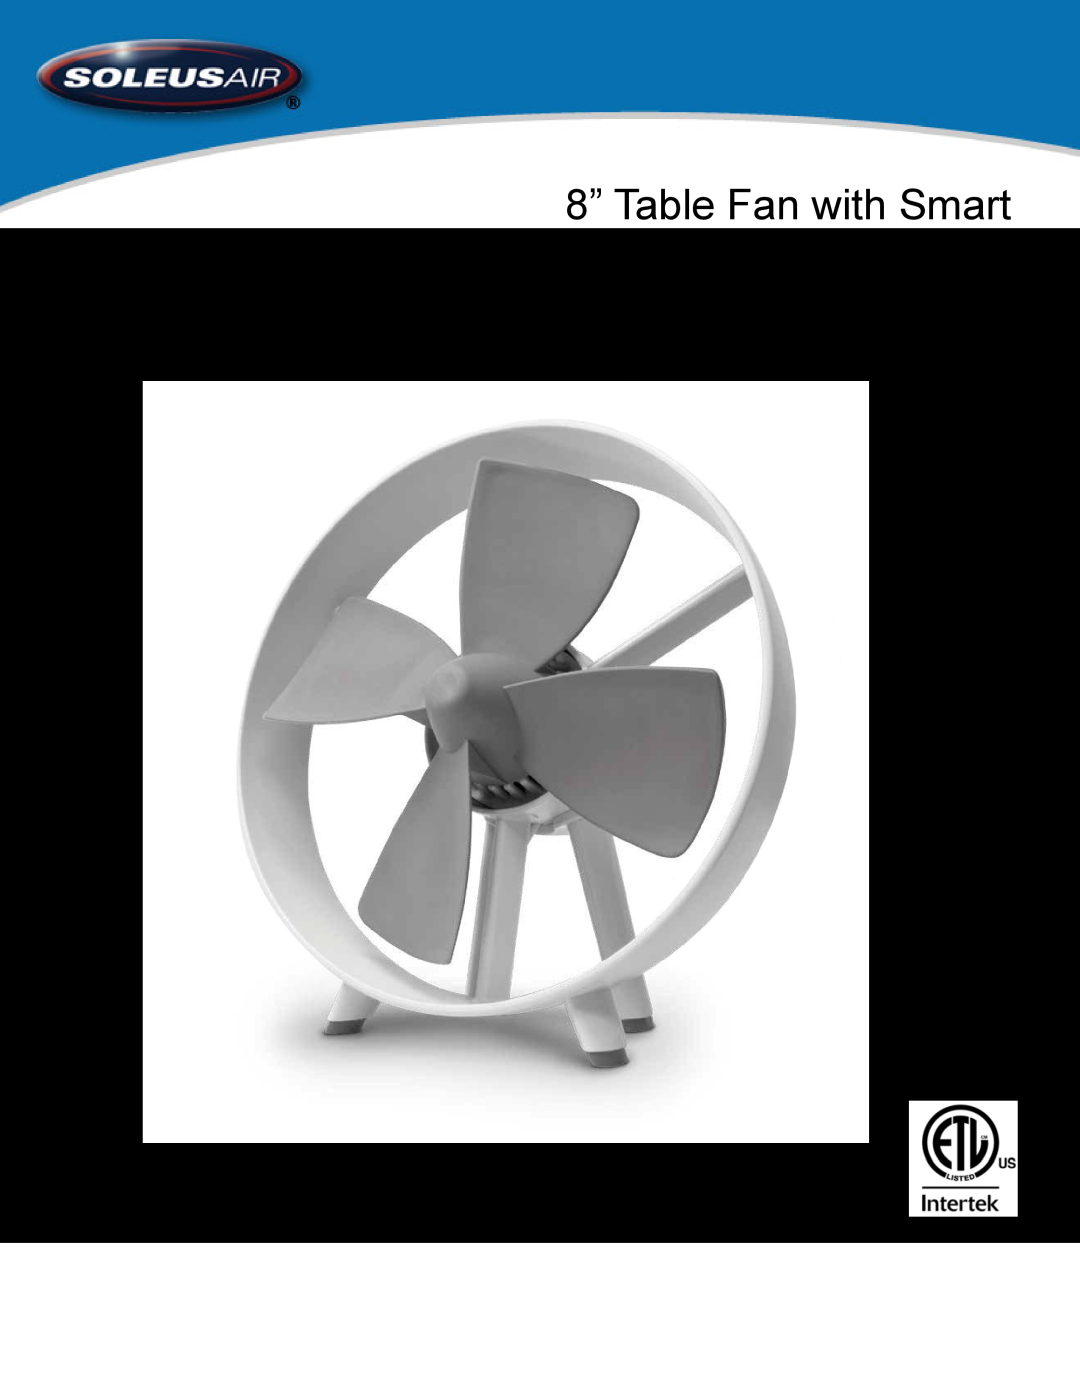 Soleus Air ft1-20-10 manual 8” Table Fan with Smart Motor and Soft Blade, Model No FT1-20-10, 3081955 